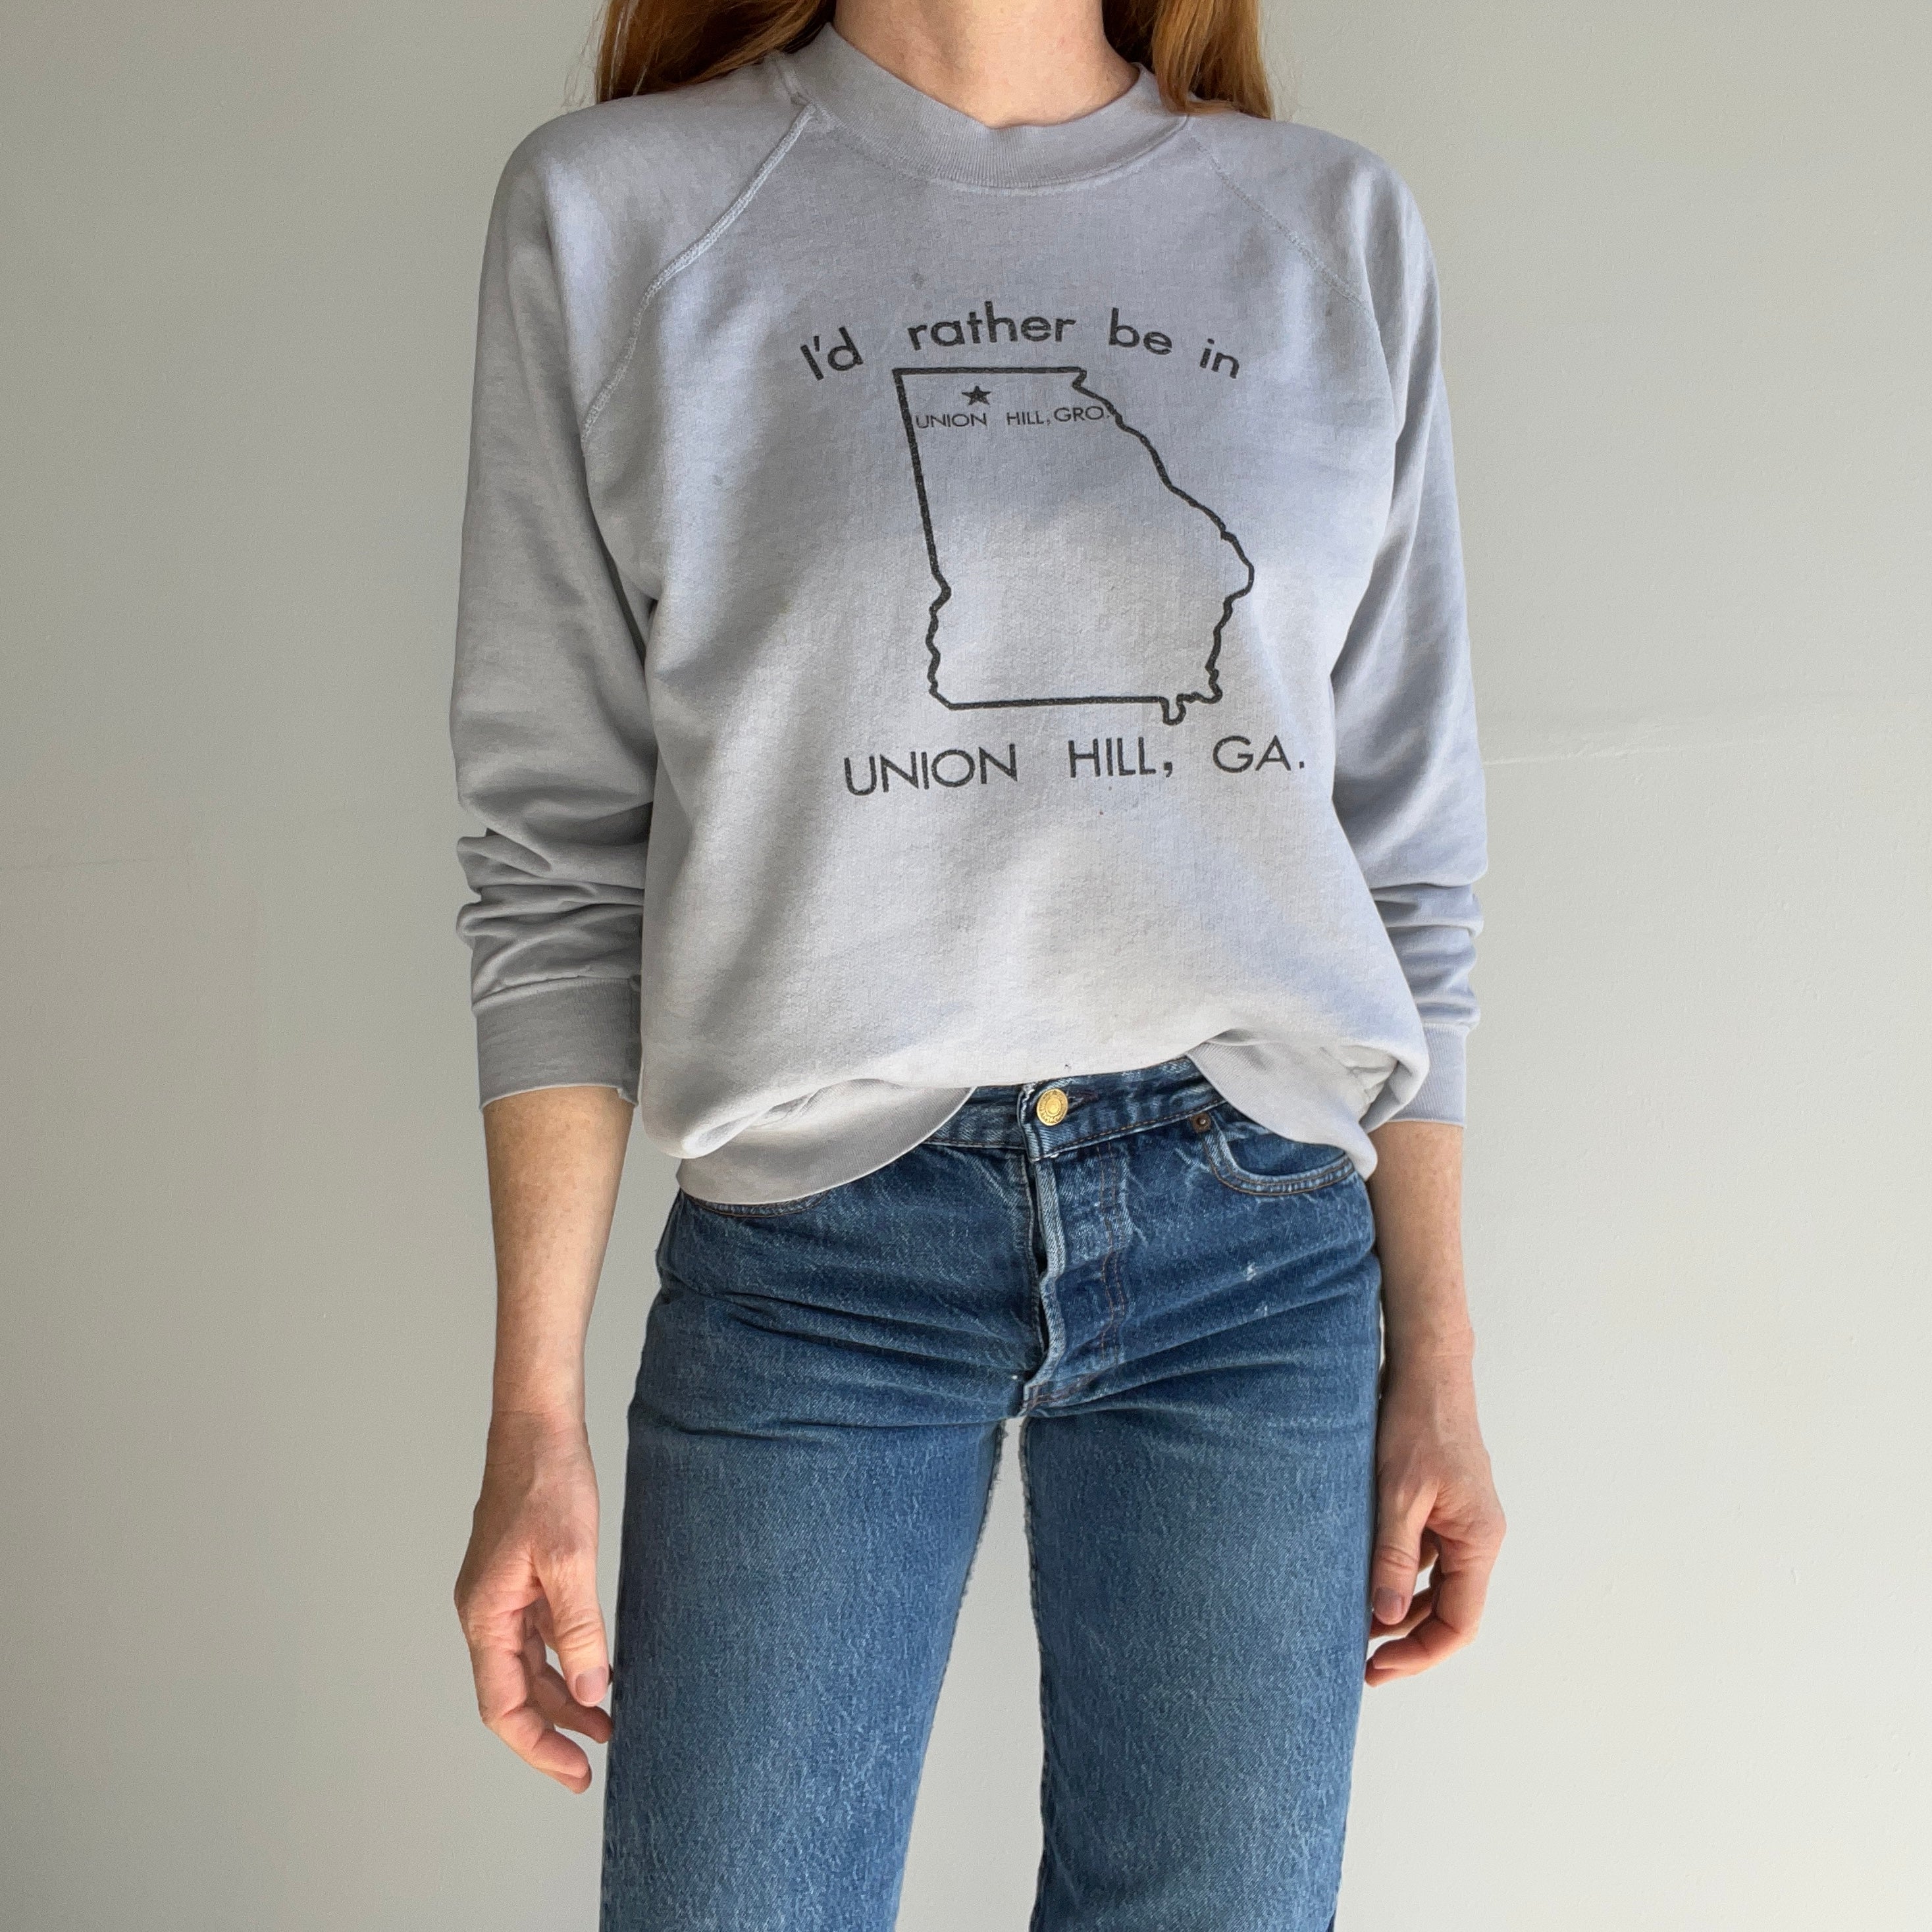 1980s I'd Rather Be in Union Hill, GA Sweatshirt